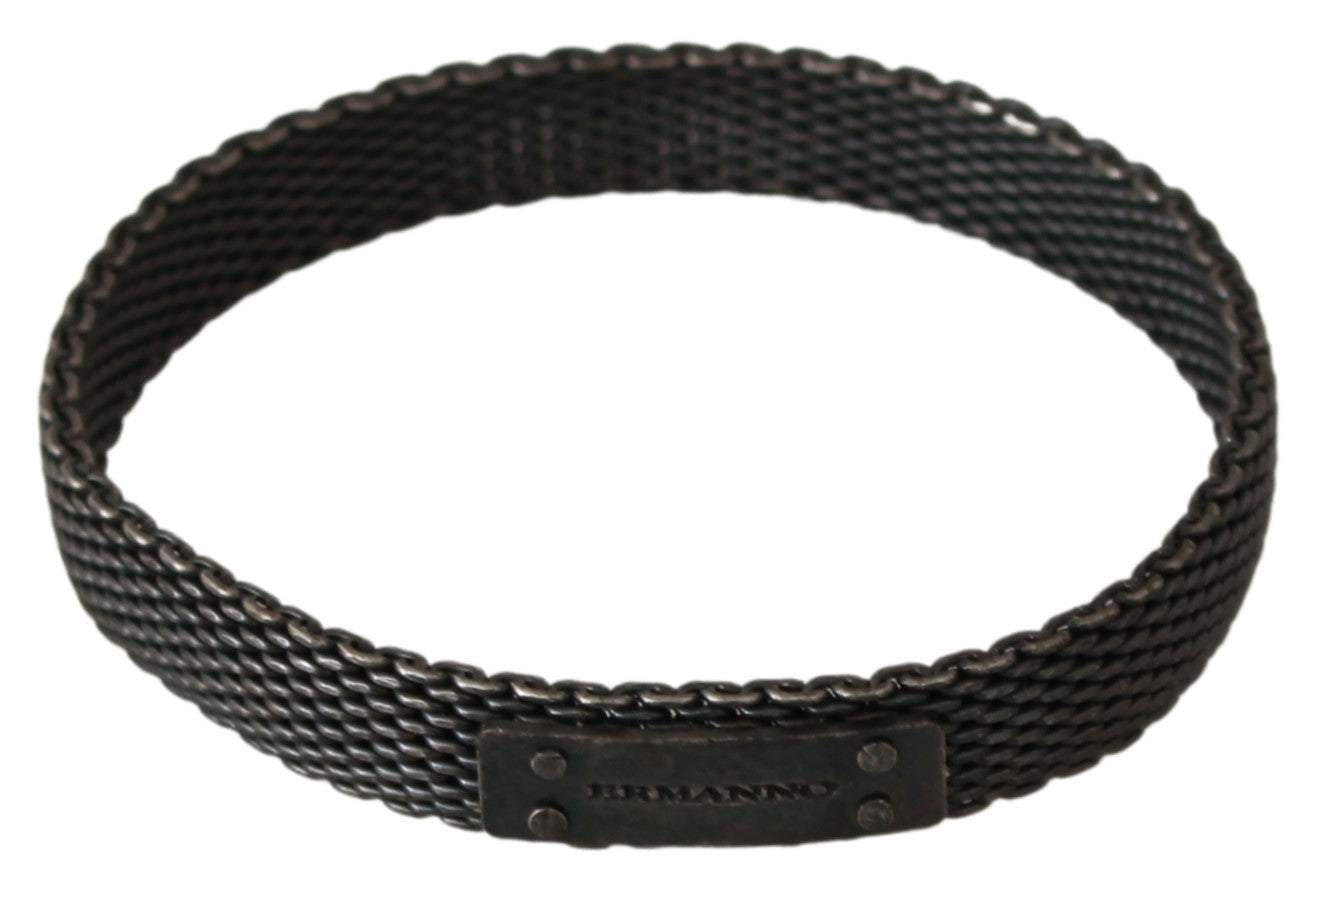 Ermanno Scervino Silver Branded Metal Steel Unisex Bracelet #men, Accessories - New Arrivals, Bracelets - Men - Jewelry, Ermanno Scervino, feed-agegroup-adult, feed-color-Silver, feed-gender-male, Silver at SEYMAYKA